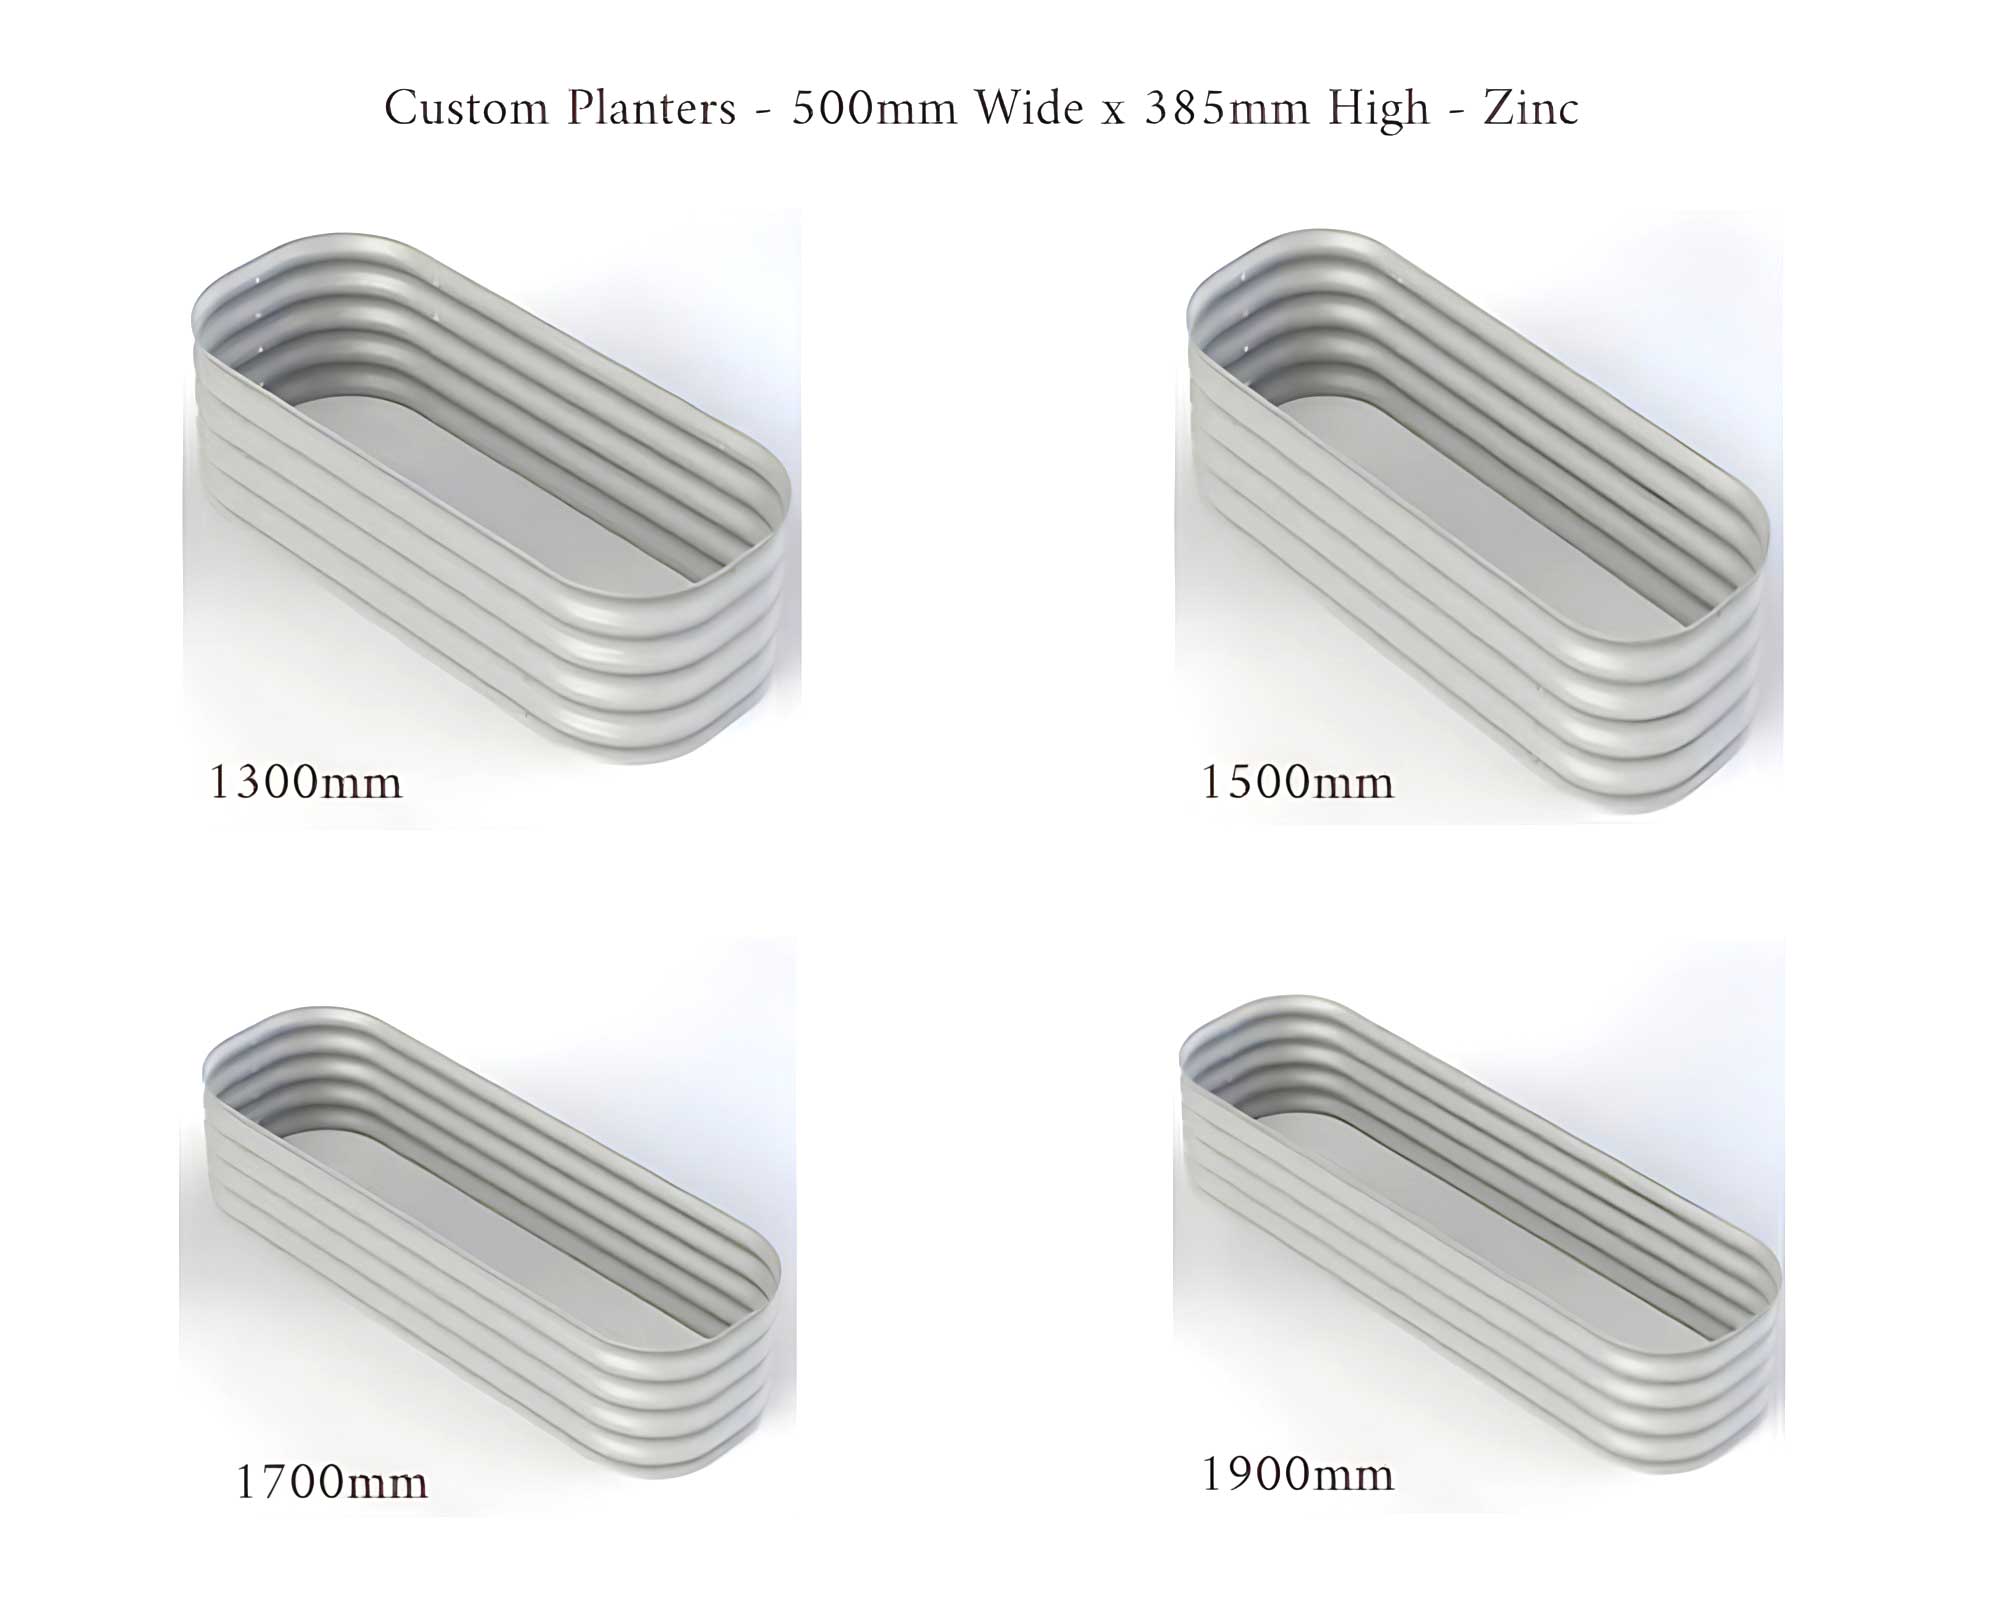 Birdies Custom Planters - 500mm Wide x 385mm High - Lenghts: 1300mm, 1500mm, 1700mm and 1900mm - Zinc